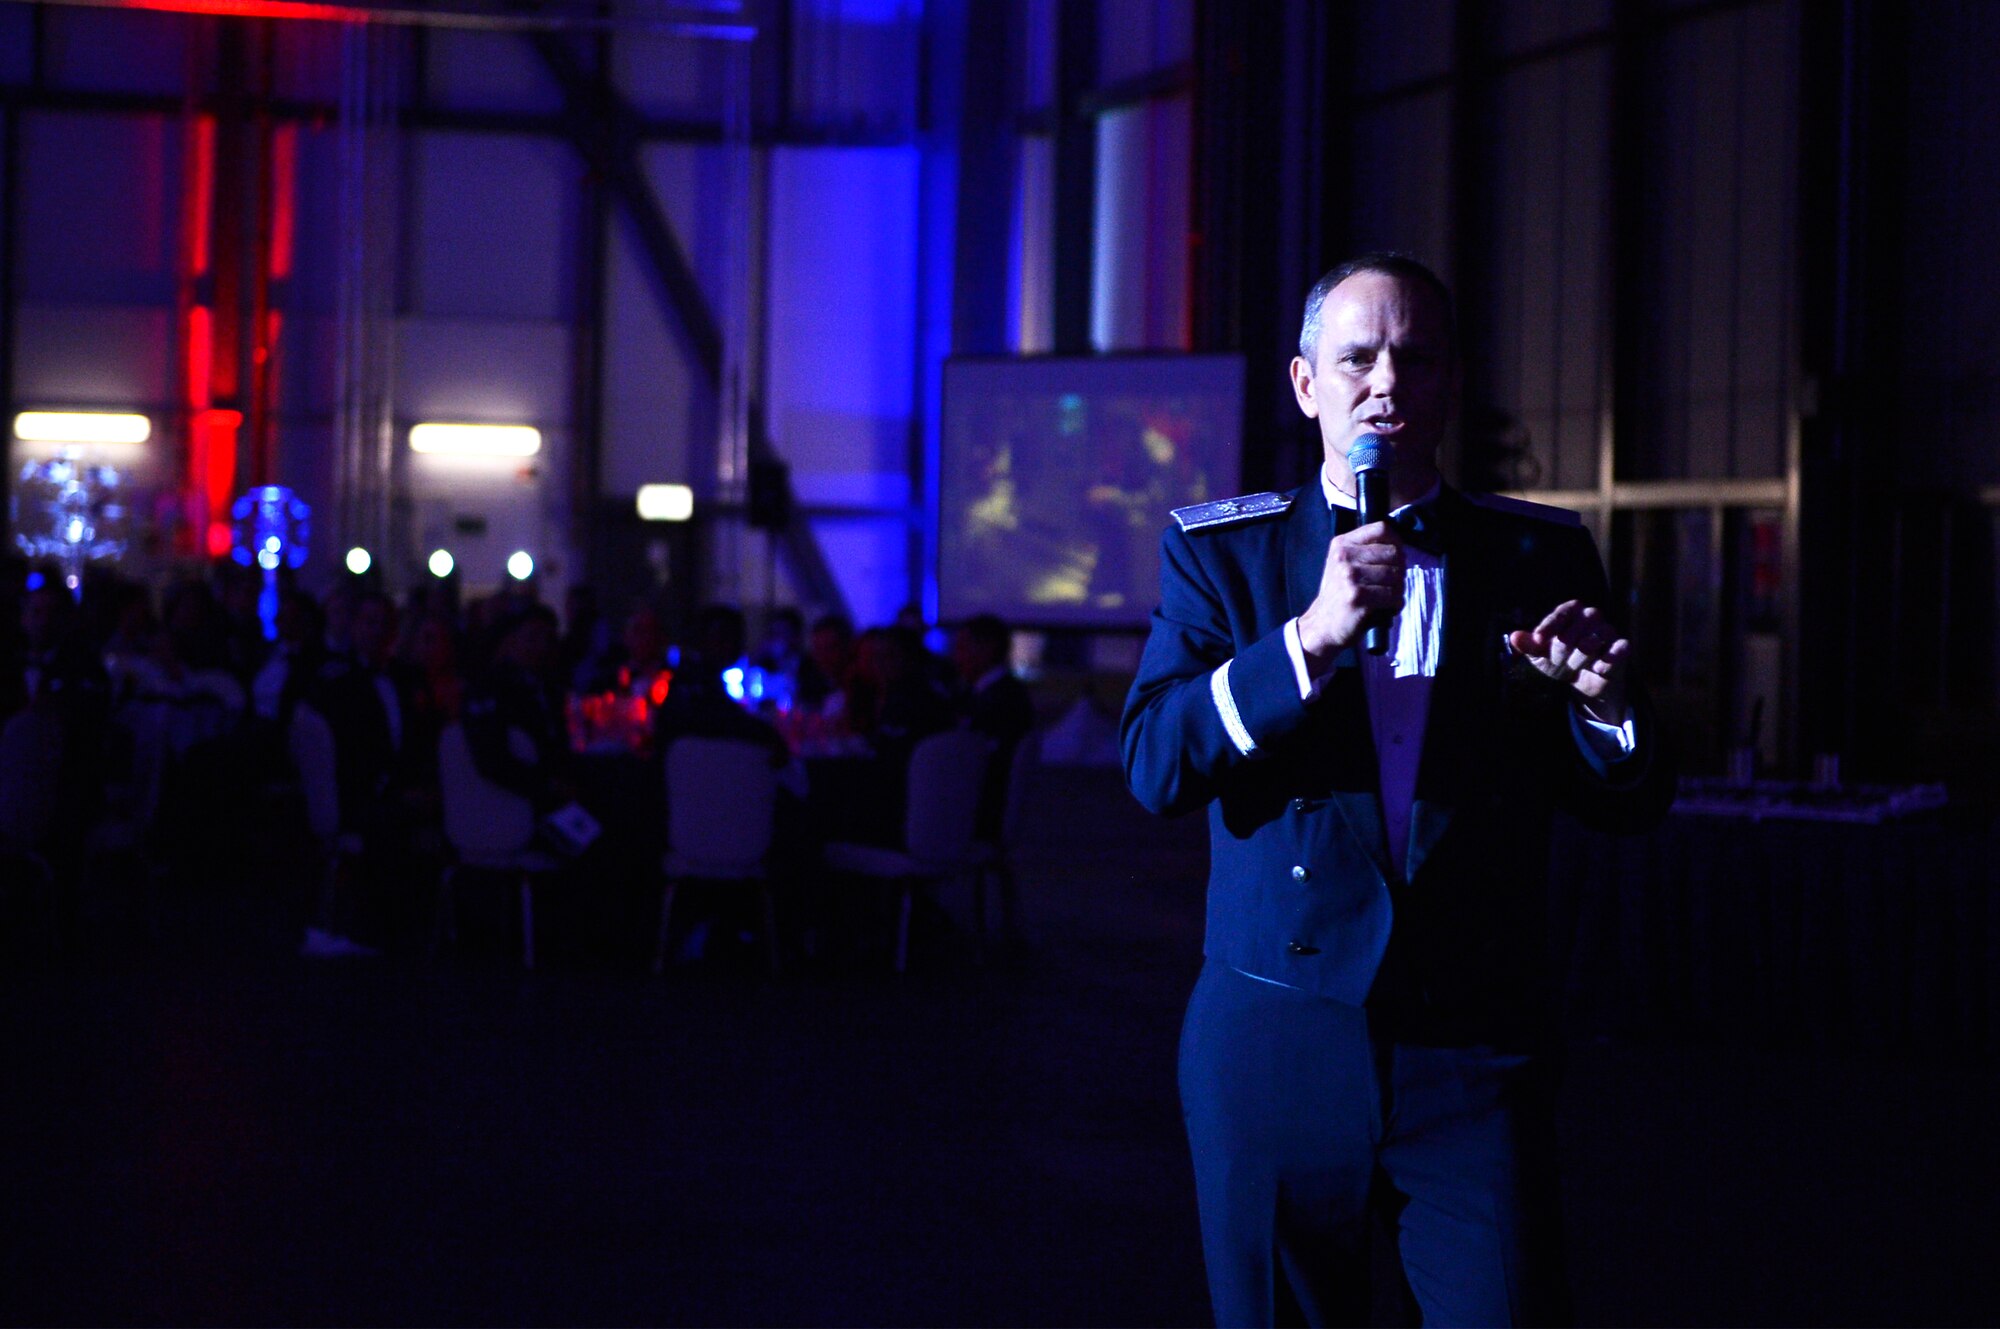 U.S. Air Force Brig. Gen. Charles S. Corcoran, U.S. Air Forces in Europe-Air Forces Africa Strategic Deterrence and Nuclear Integration director of operations, addresses attendees during an Air Force Ball celebration on Ramstein Air Base, Germany, Sept. 22, 2018. Corcoran spoke about the importance of all Airmen in mission accomplishment. (U.S. Air Force photo by Senior Airman Joshua Magbanua)